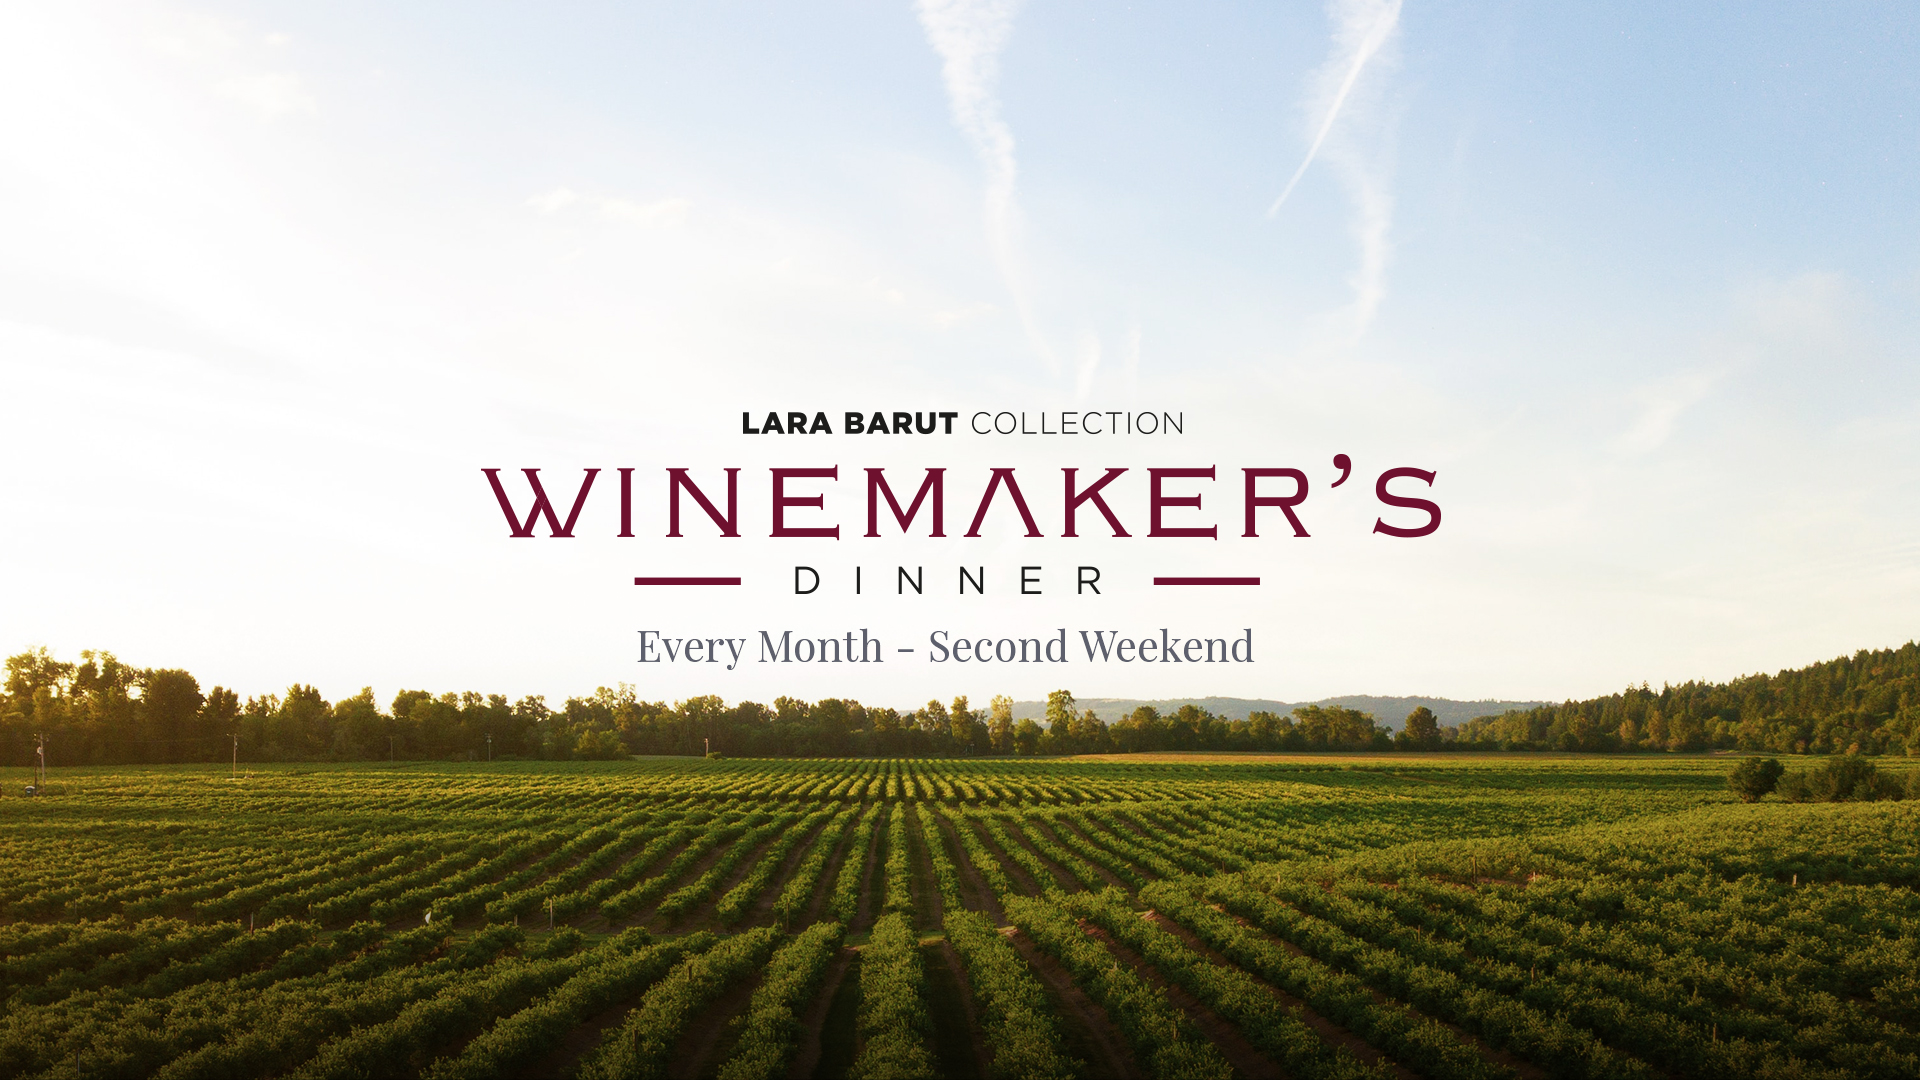 Every 2Nd Weekend Of Every Month, Wine Maker's Dinner Meeting At Lara Barut Collection